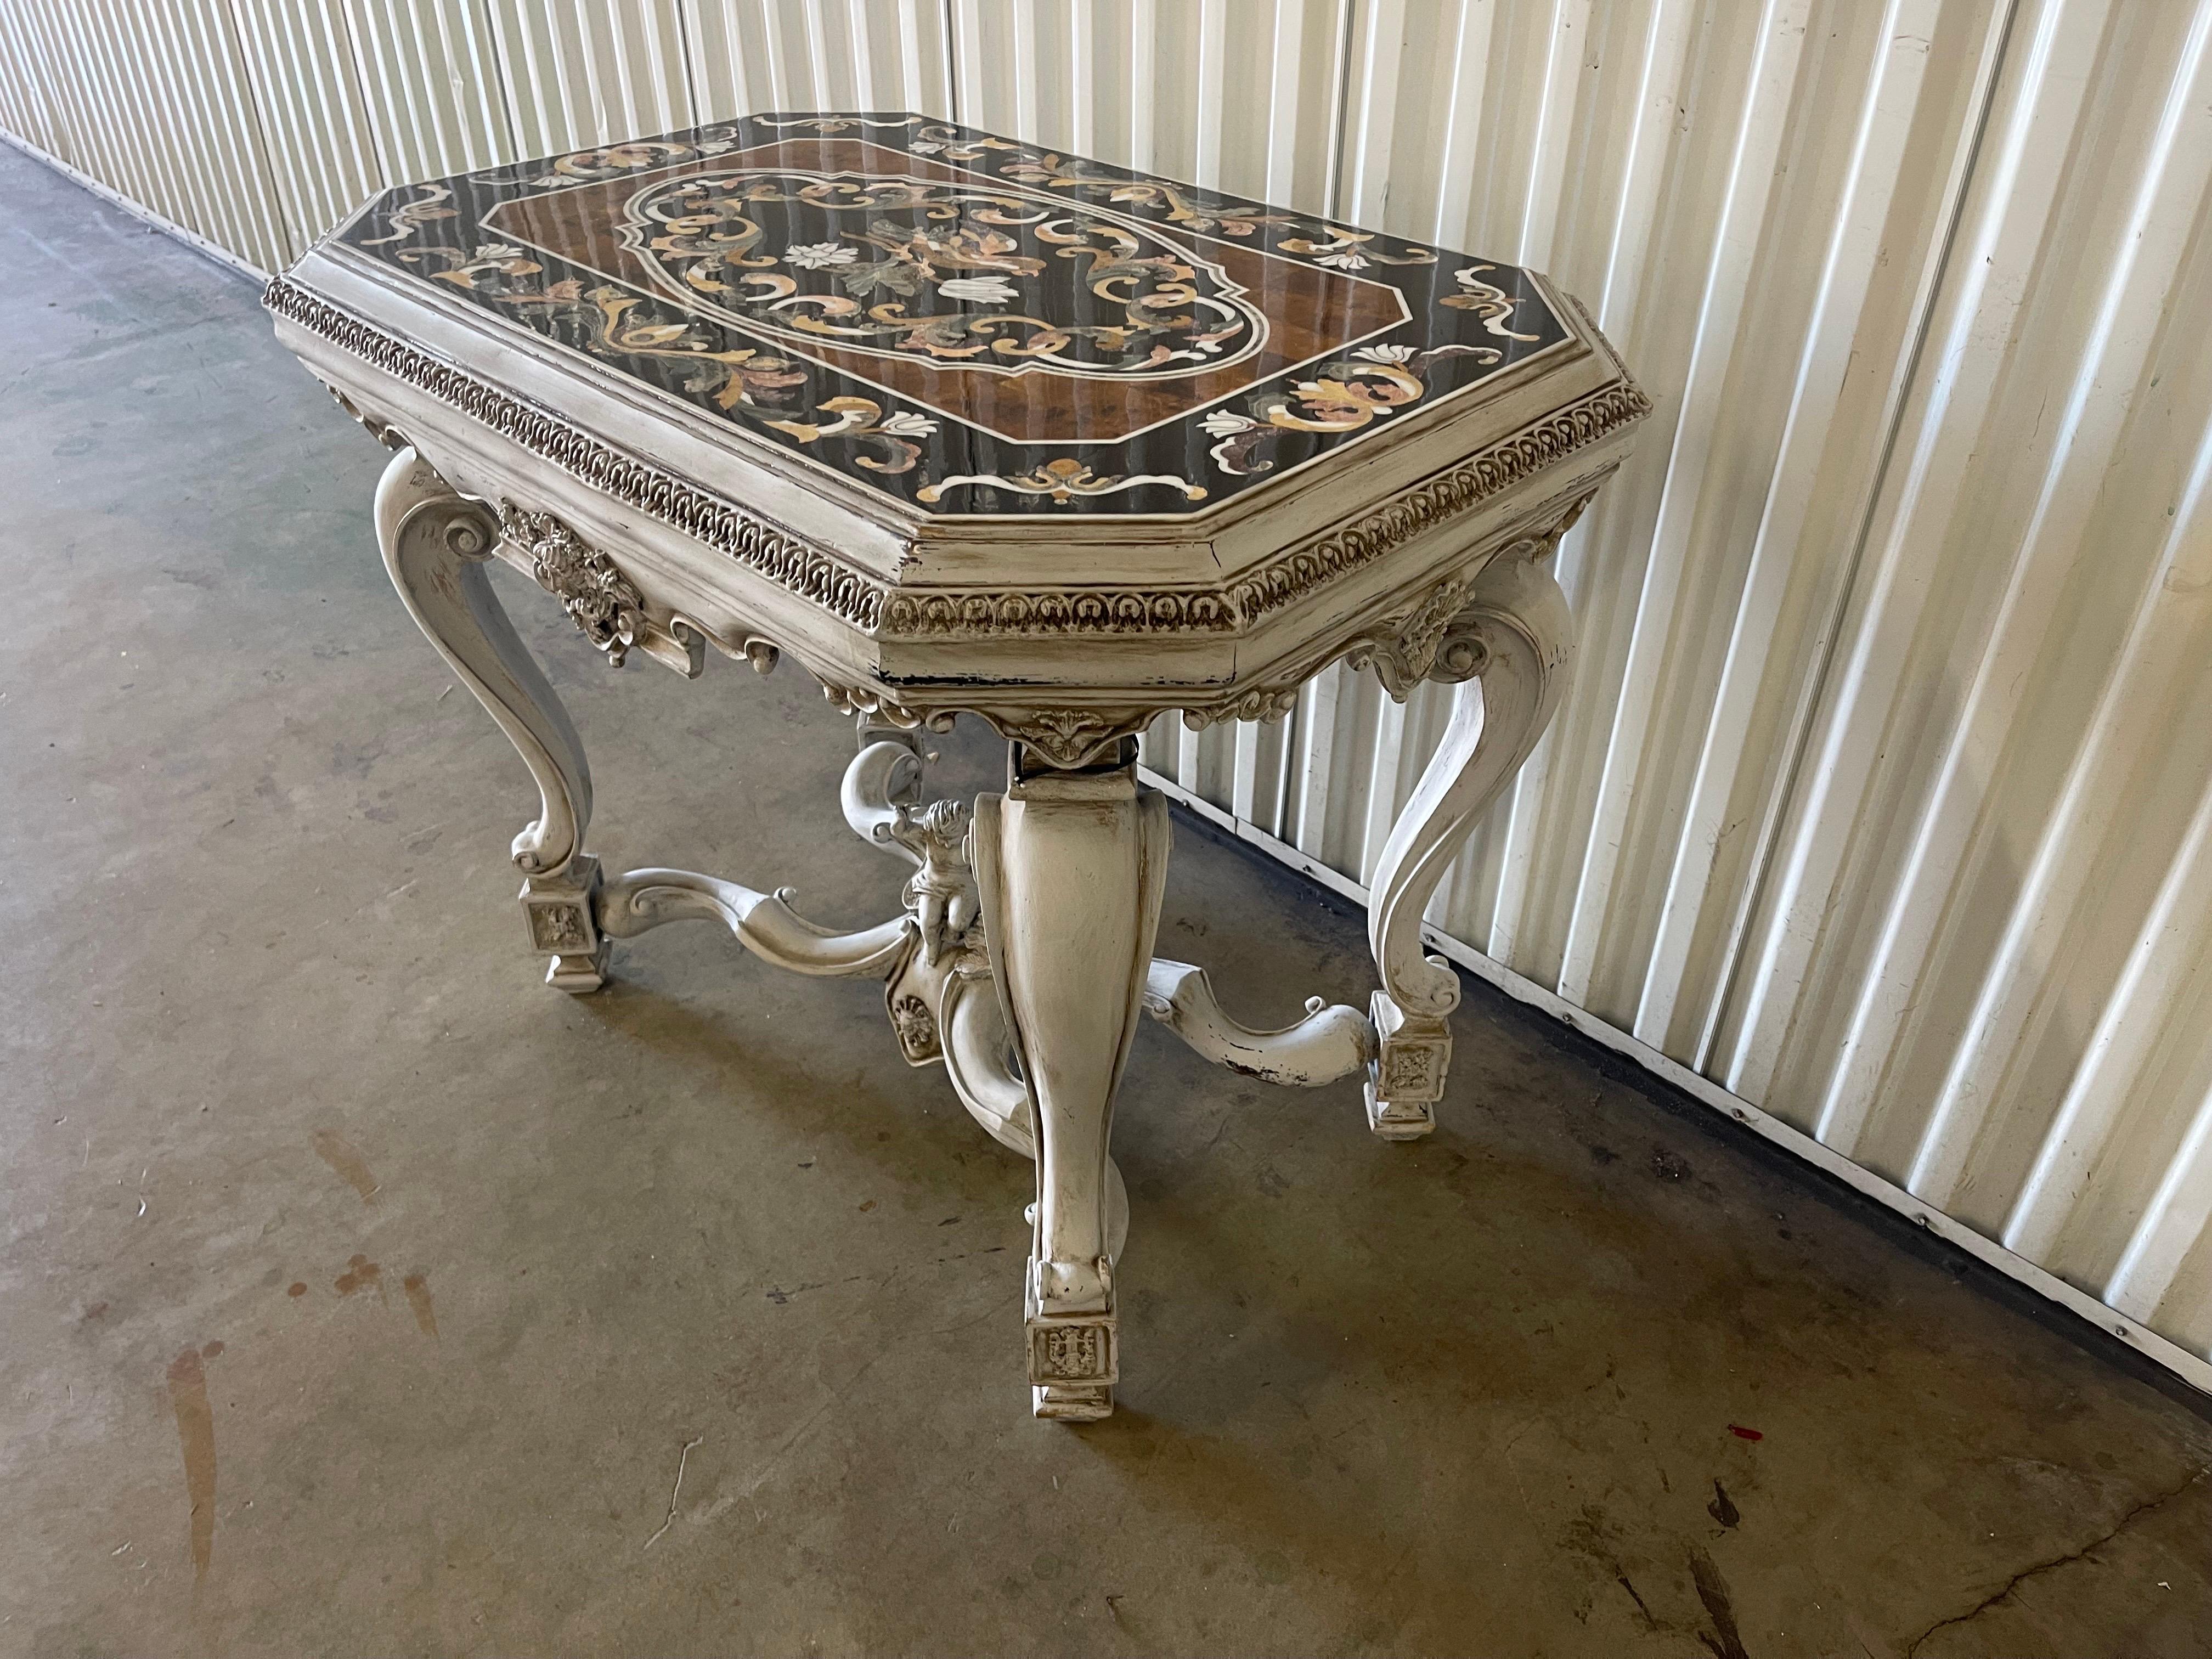 Carved and painted Rococo style center table with pietra dura top. Carved and gesso base with putto in center. Legs are in the cabriolet style.